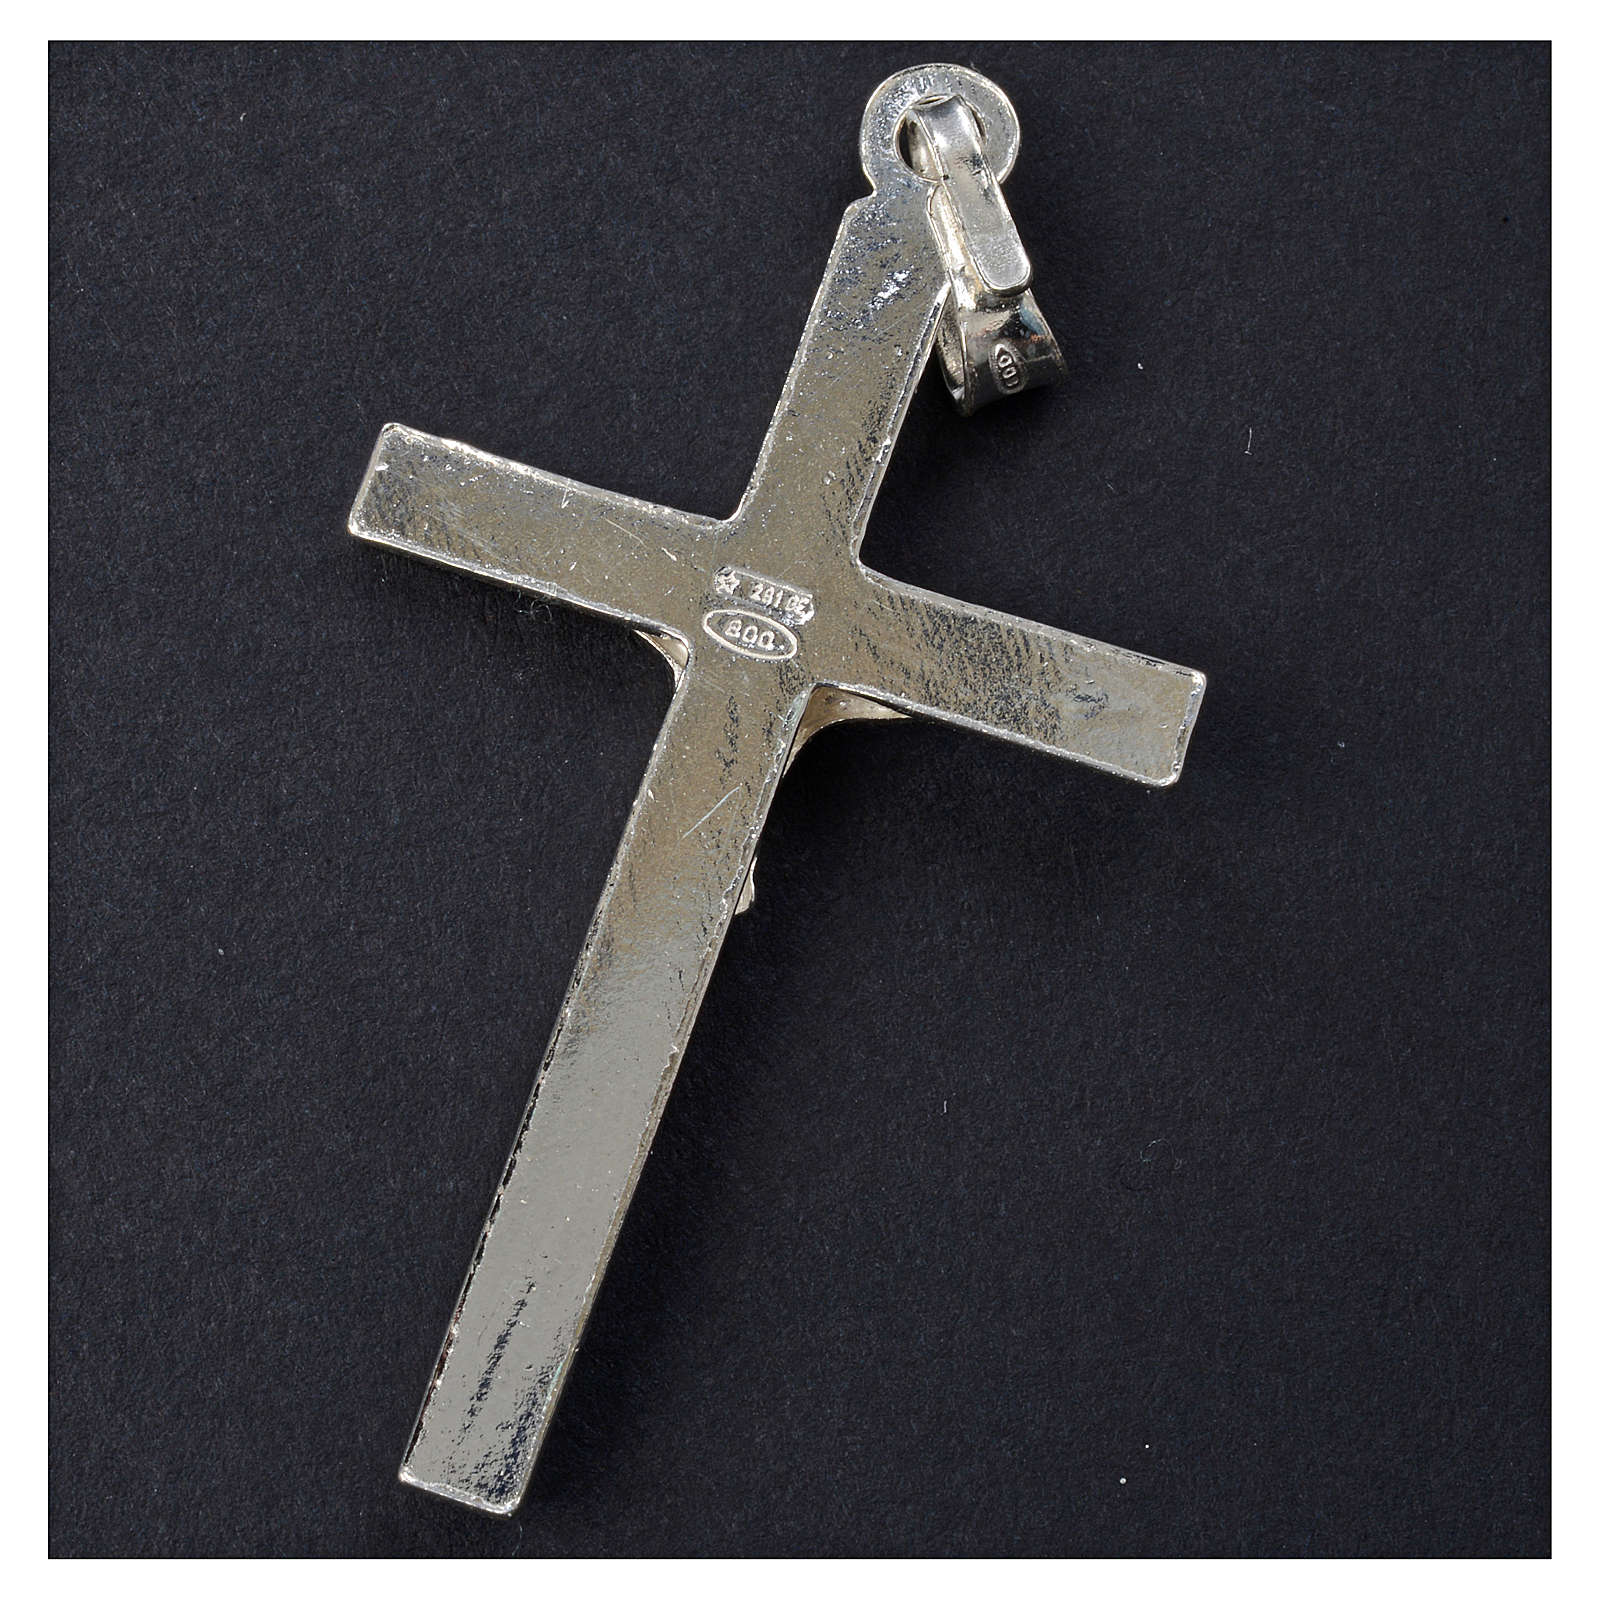 Pendant crucifix in 925 silver, 3,5x2,5cm | online sales on HOLYART.co.uk